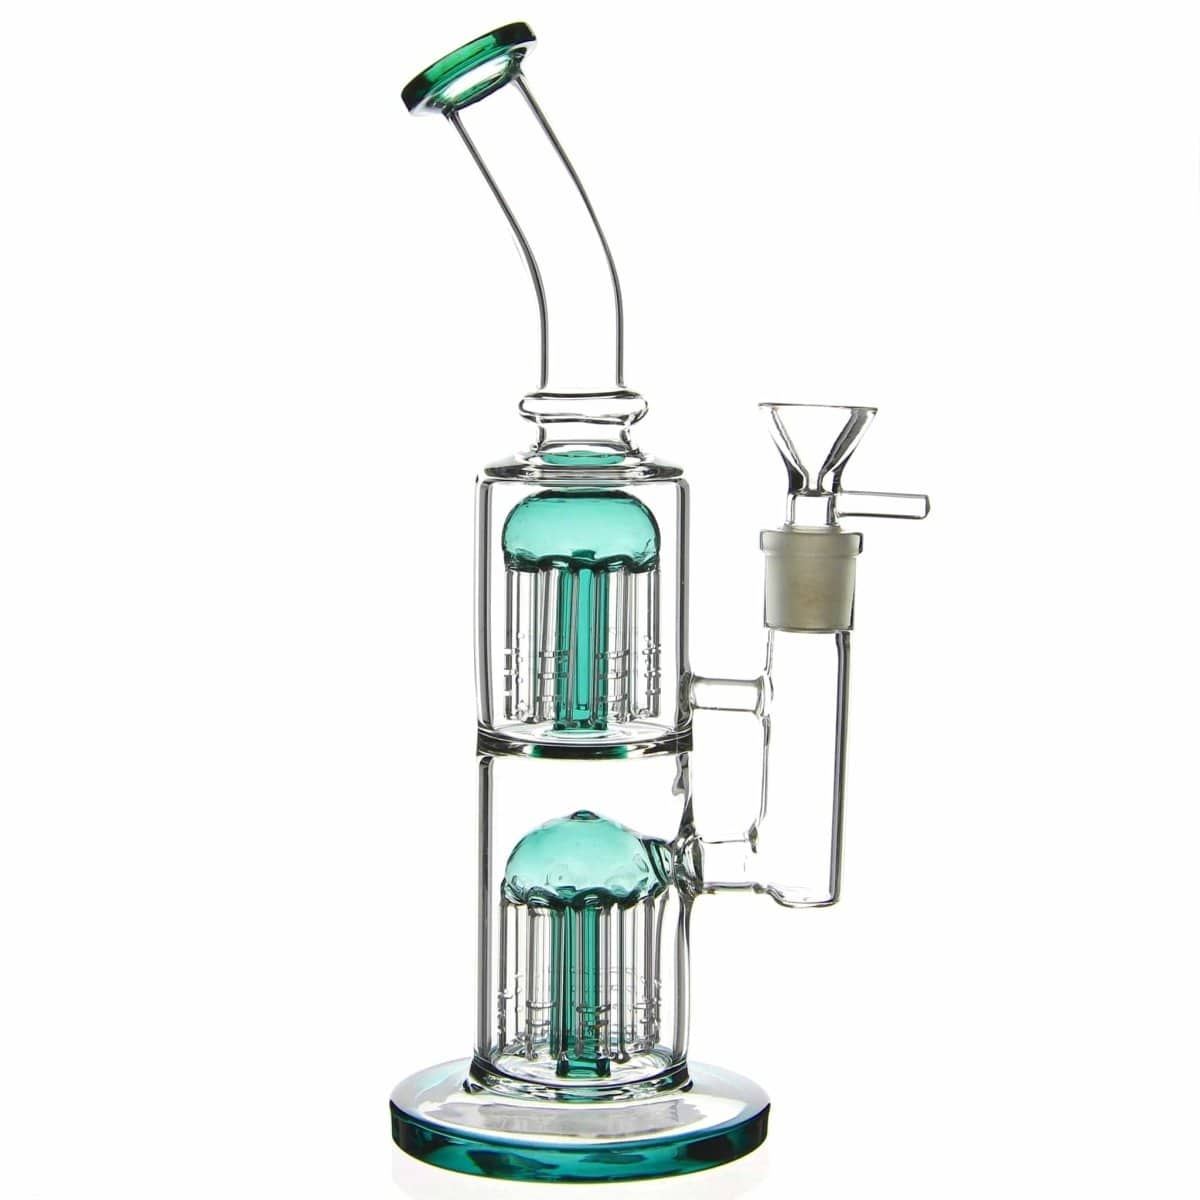 Benext Generation Glass Teal Double Jammer Tree Perc Bong